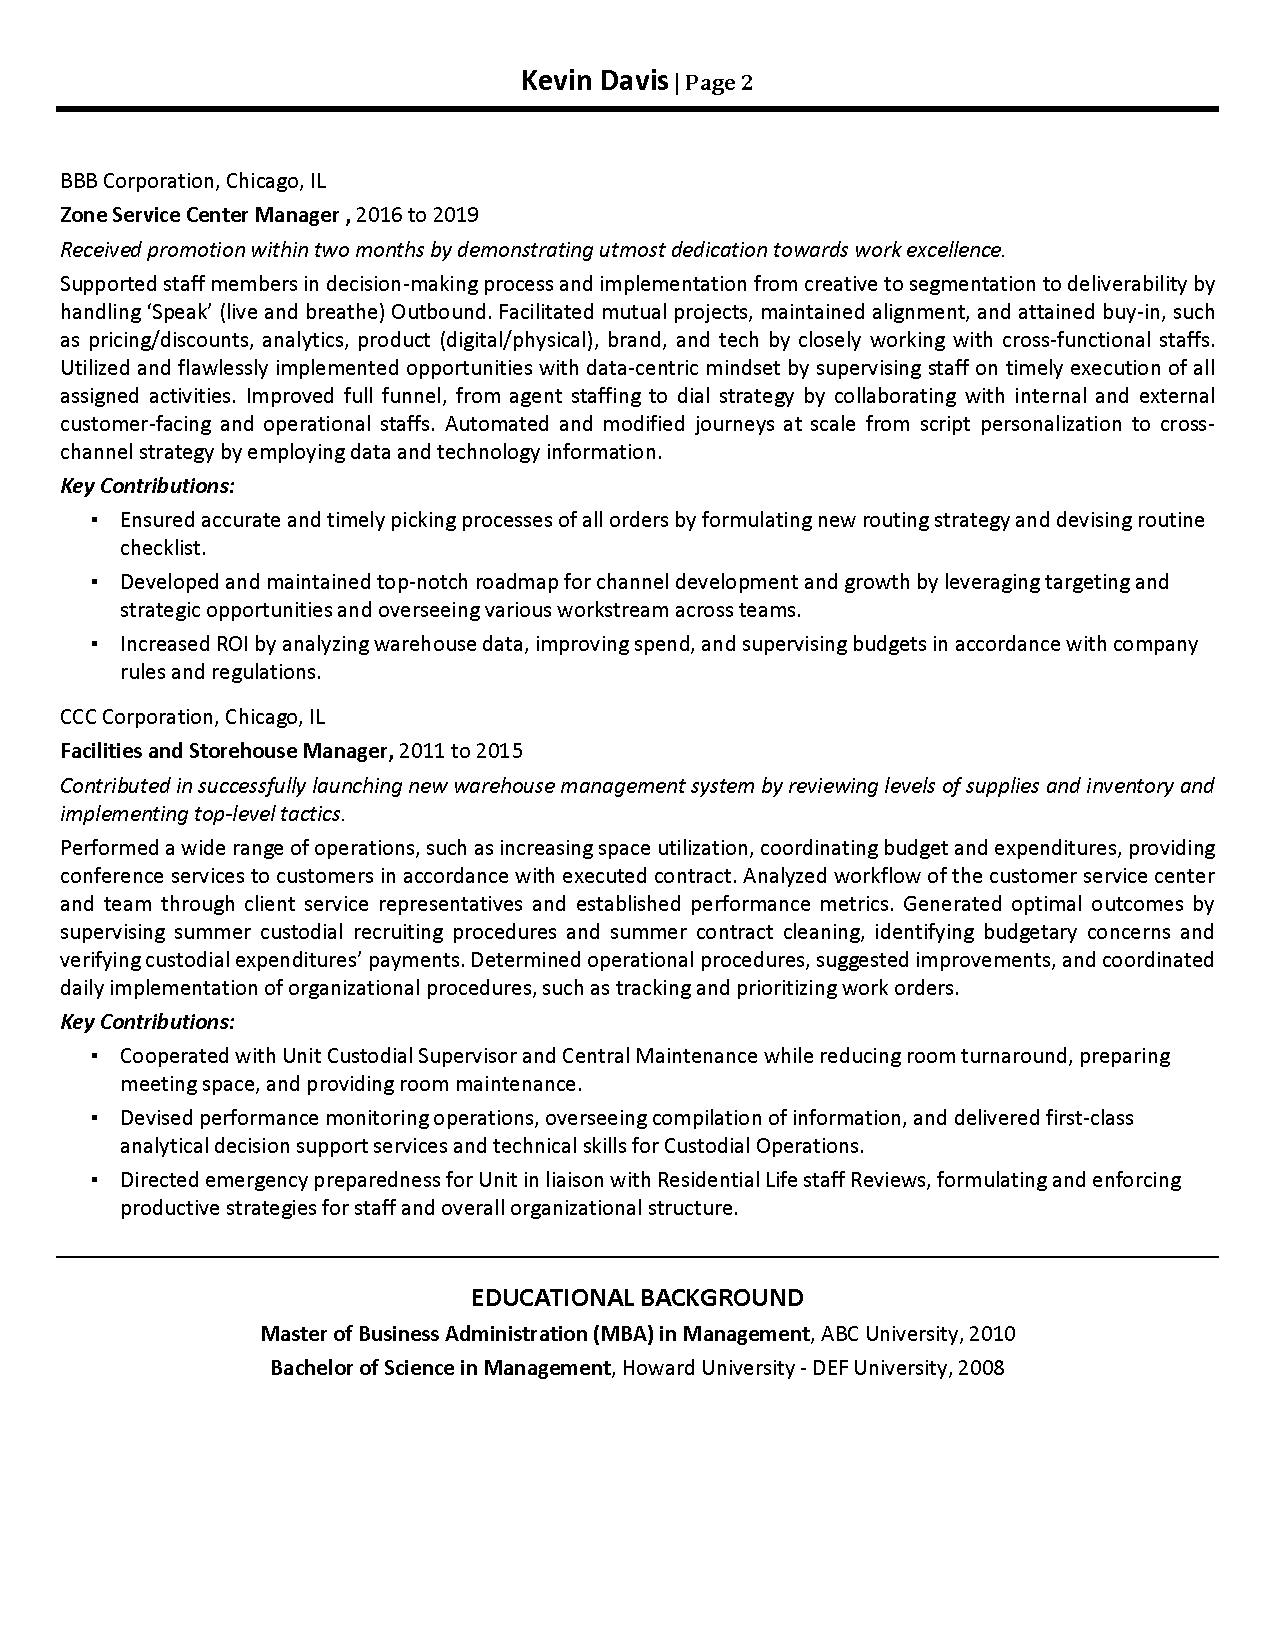 00002 facilities manager resume example Page 2